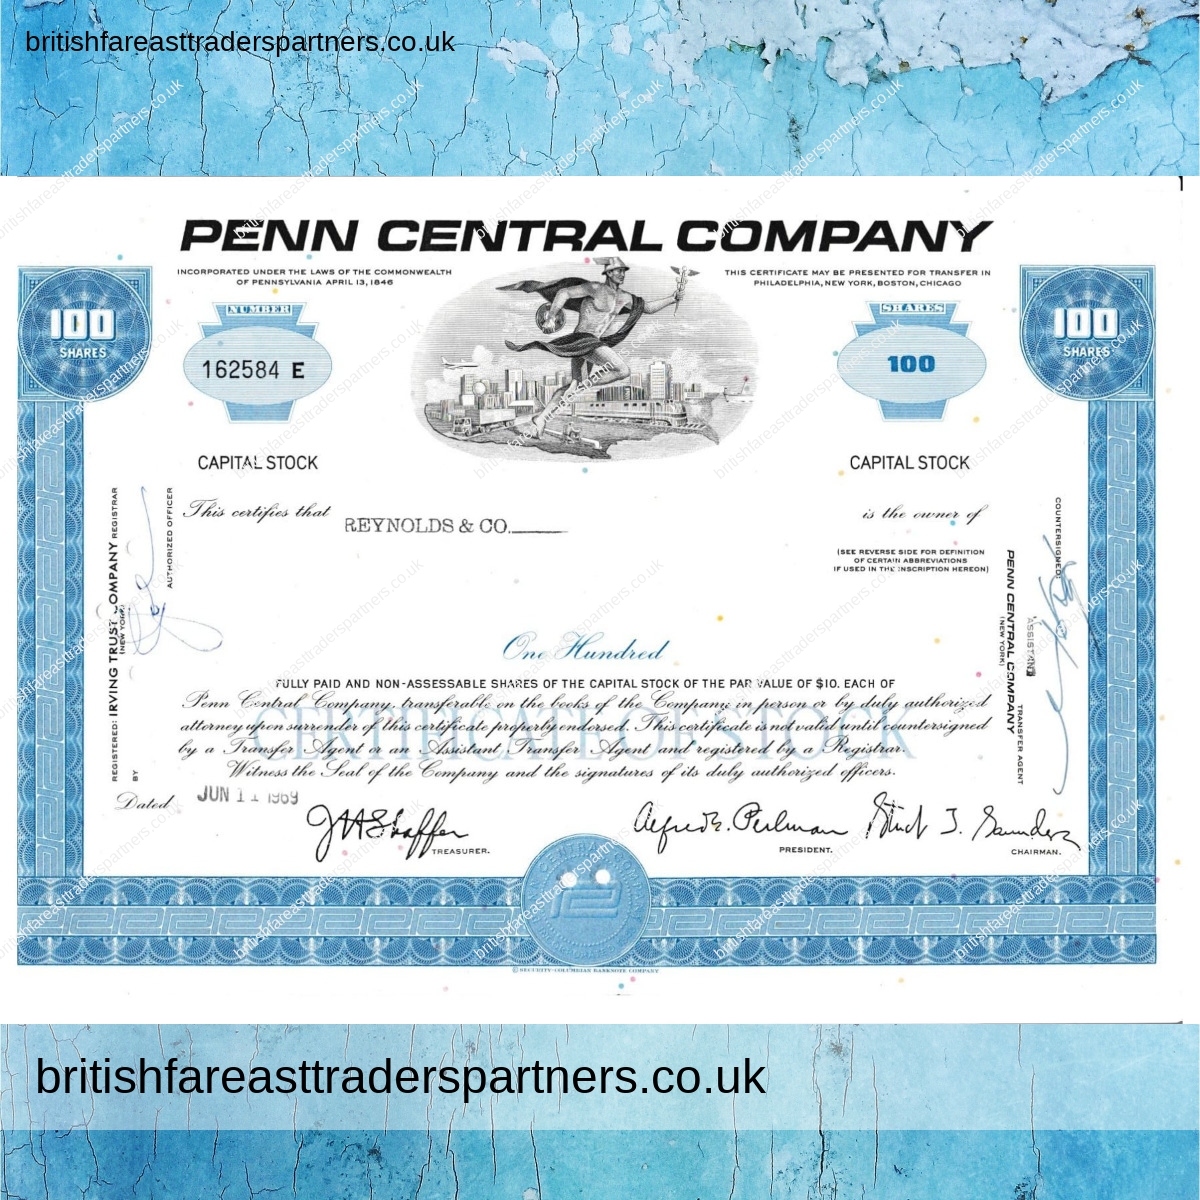 VINTAGE STOCK / SHARE CERTIFICATE “PENN CENTRAL COMPANY” COLLECTABLE DOCUMENTS |  SHARE CERTIFICATES | COMPANIES | WORLD | SCRIPOPHILY | BUSINESS | INVESTMENTS